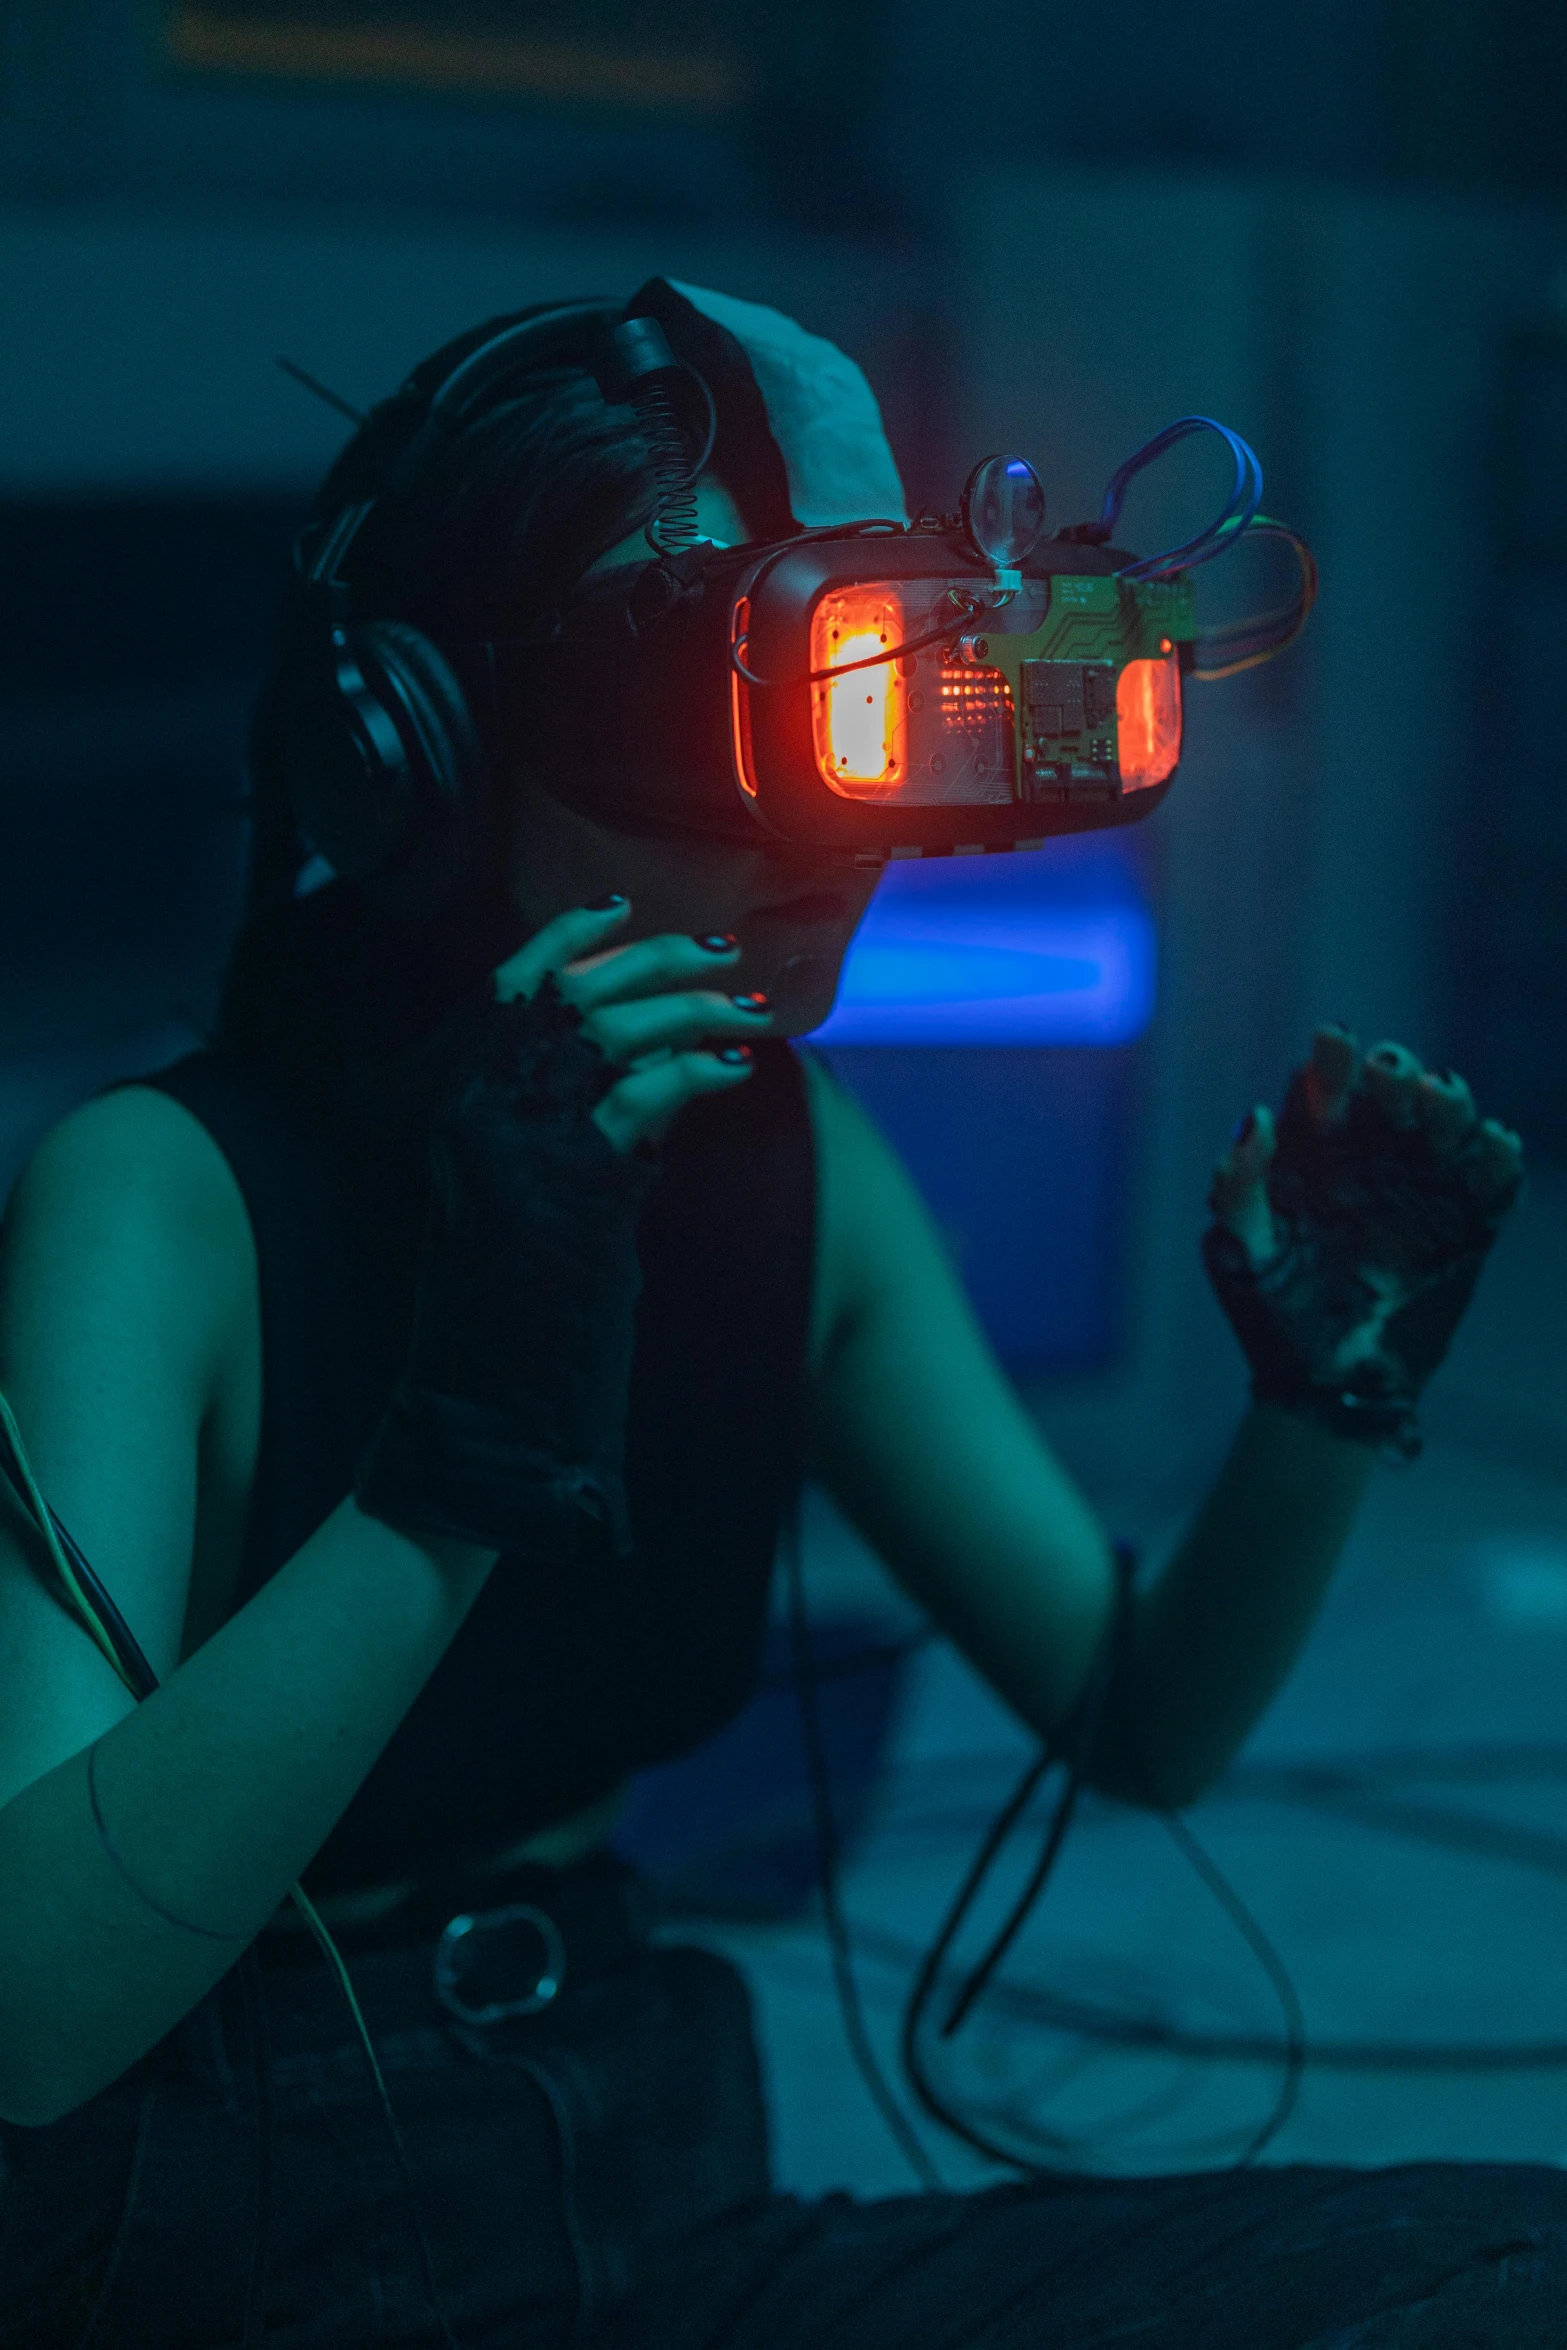 a woman using a virtual reality device in a dark room, cyberpunk art, unsplash contest winner, wearing a gaming headset, siggraph, hazy, scene from a rave